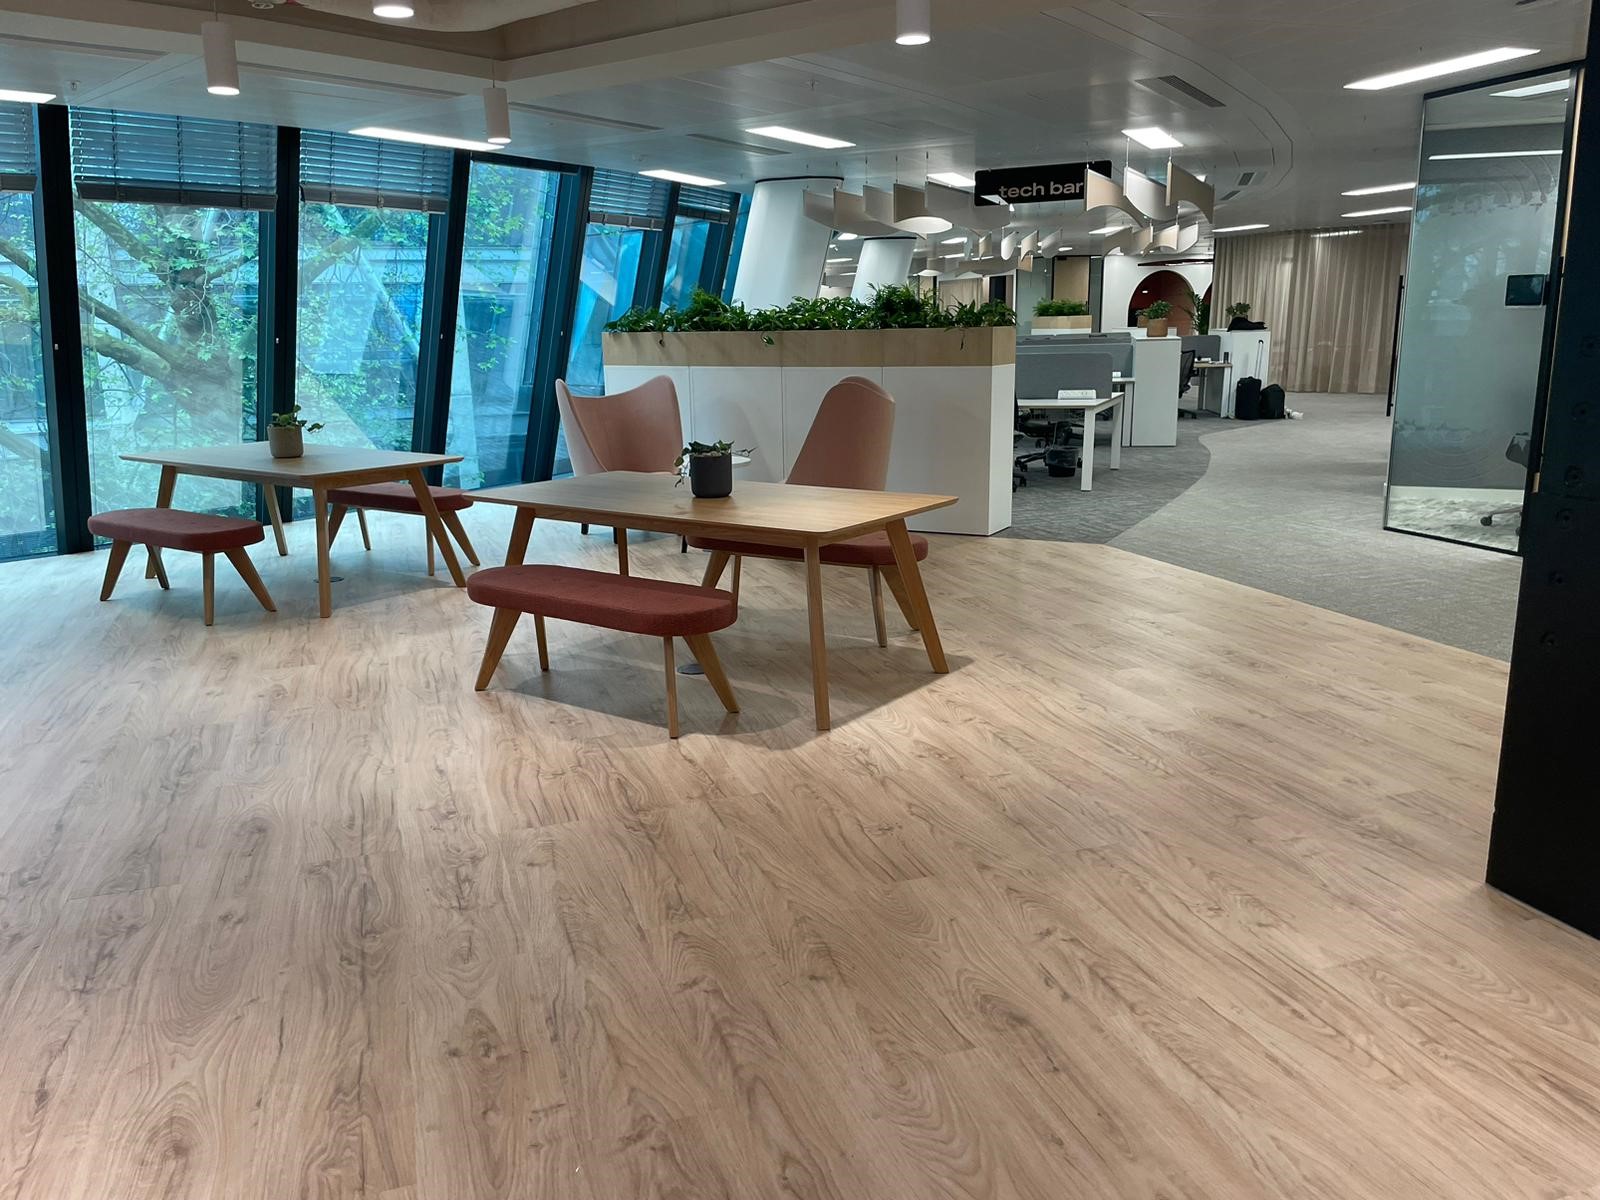 New Office Flooring installed in London. Forbo LVT timber effect flooring.